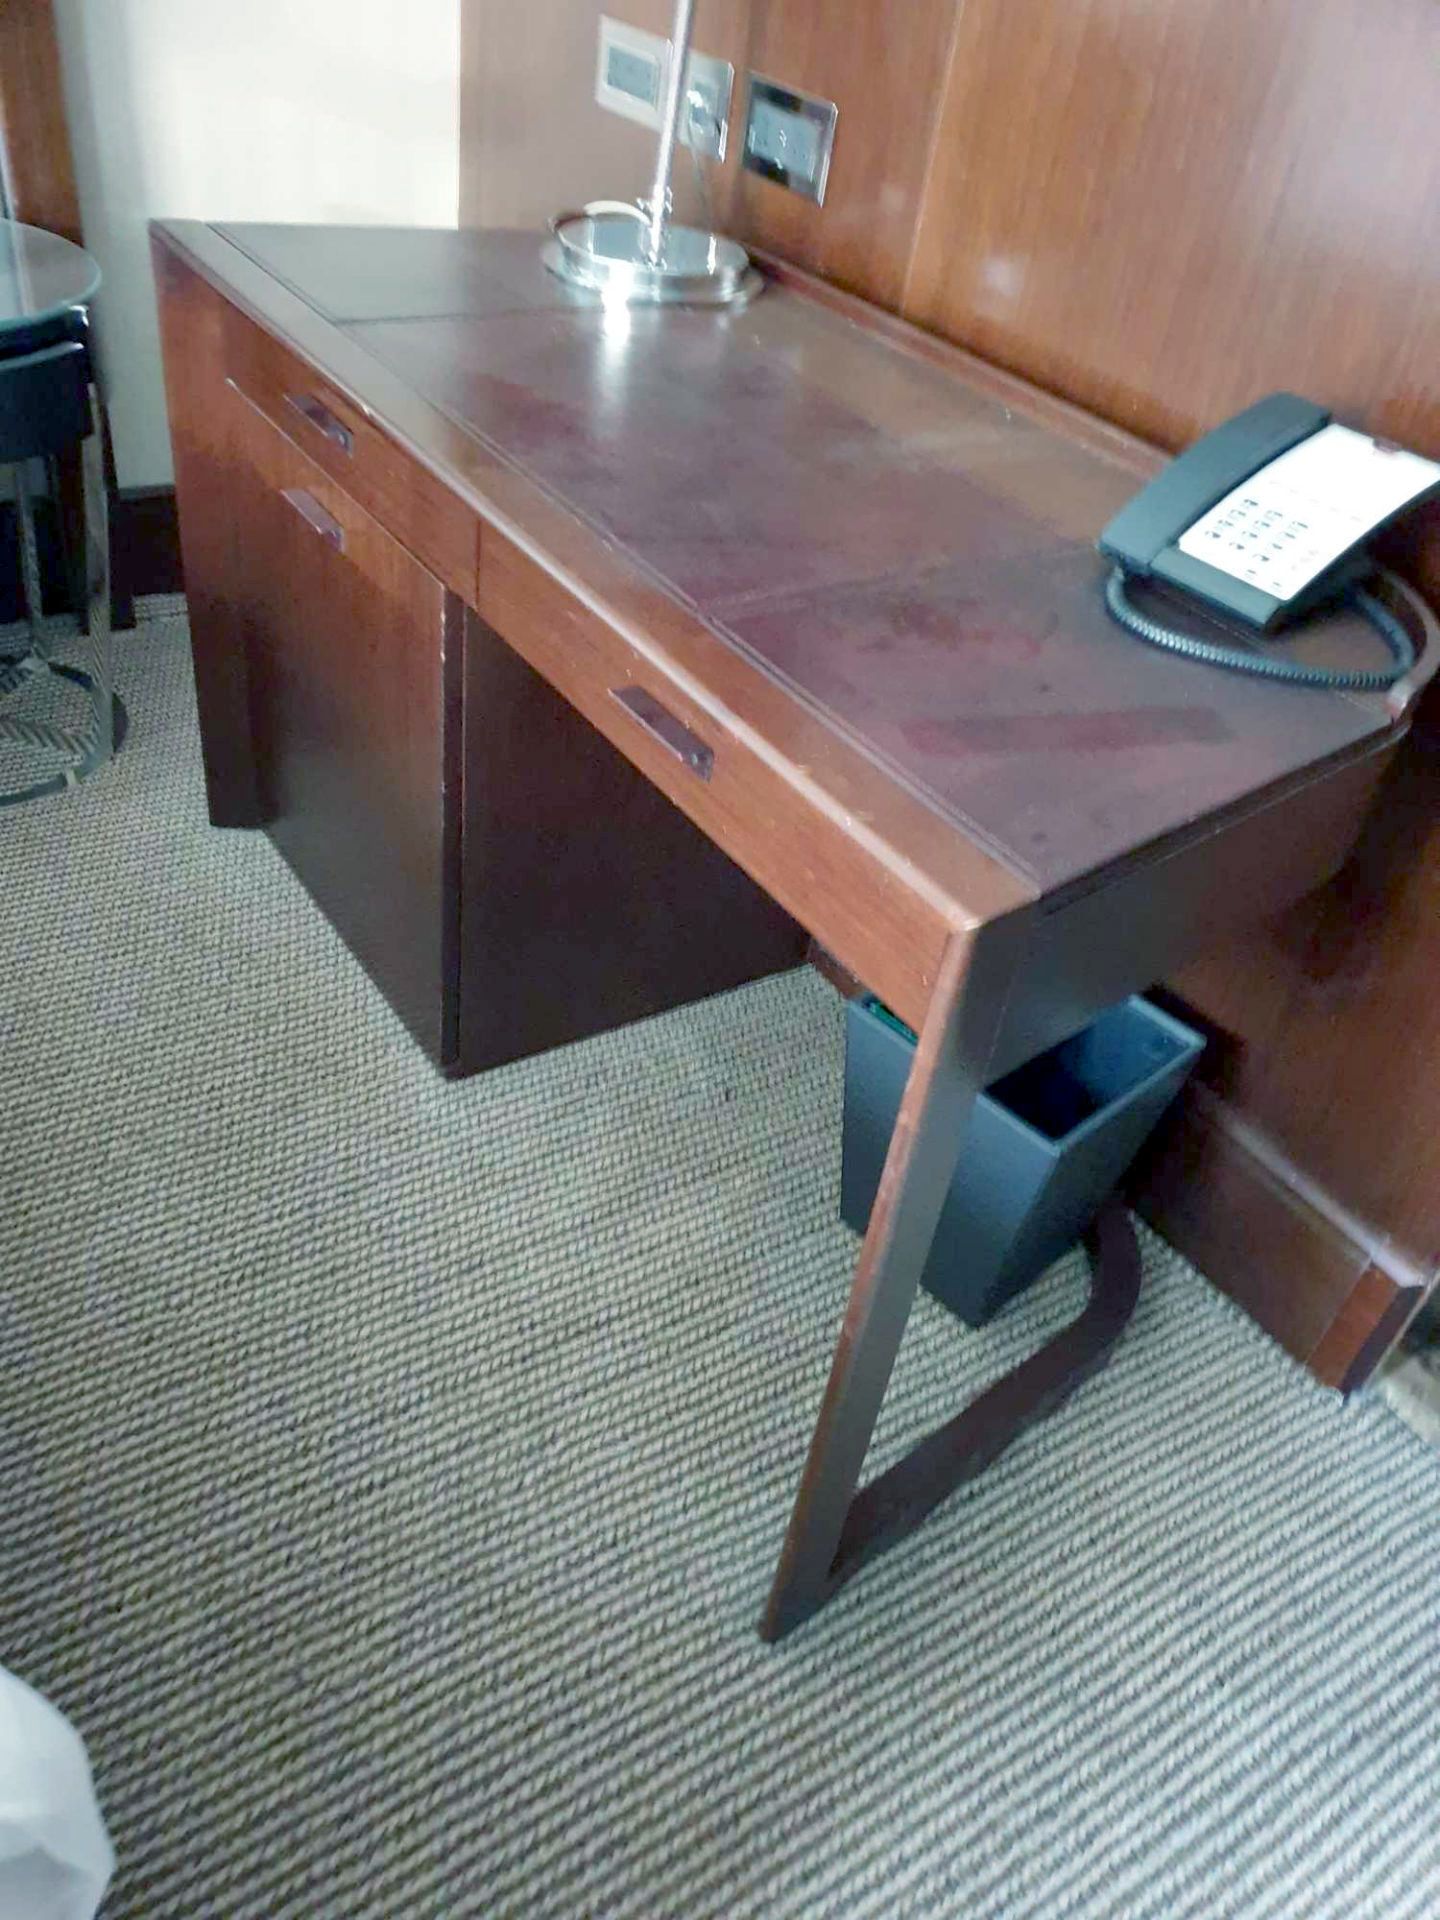 Walnut Veneer Desk By David Salmon Operational Drawers And cupboard Fitted With Dometic Minibar - Image 2 of 2